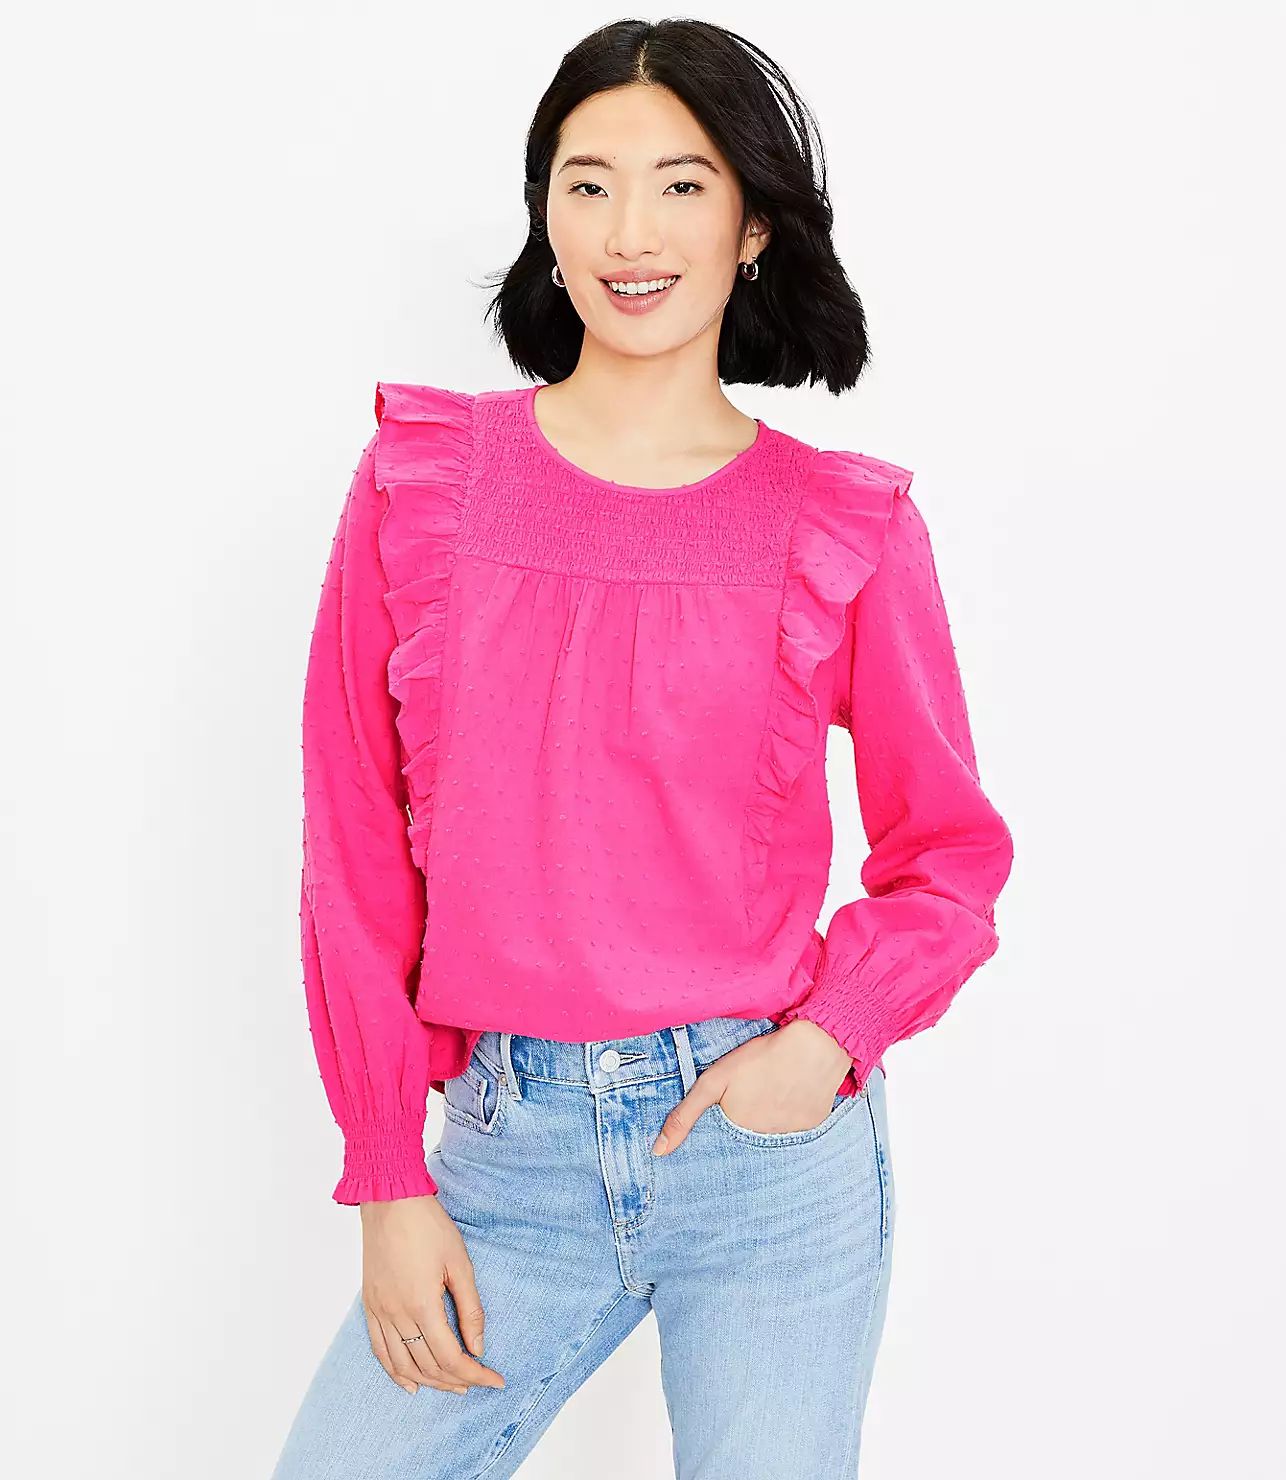 Clip Smocked Ruffle Blouse    $59.50     5.0 (1)Write a review | LOFT